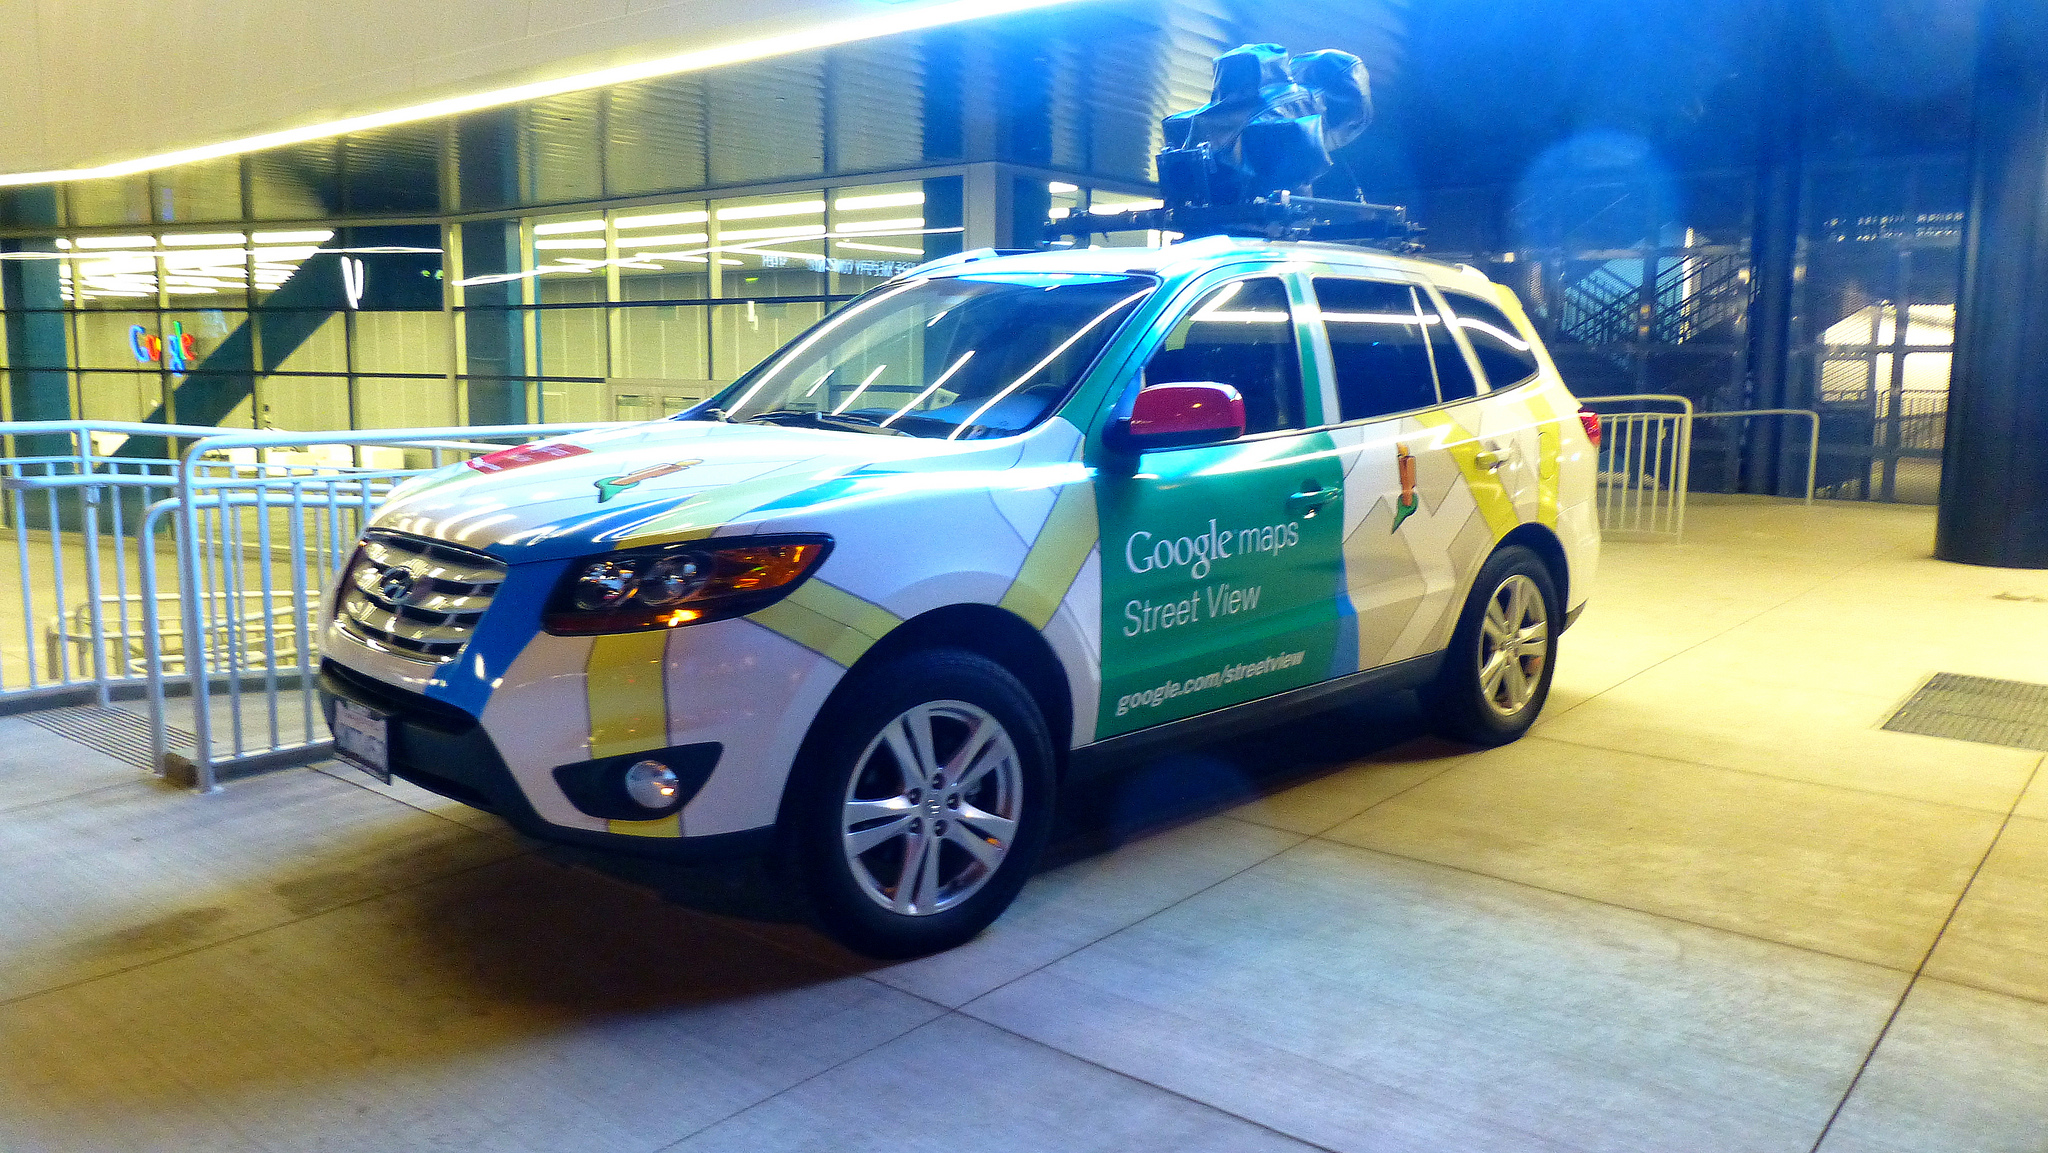 http://i1-news.softpedia-static.com/images/news2/man-attacks-google-hq-street-view-and-self-driving-cars-because-he-felt-tracked-506035-2.jpg